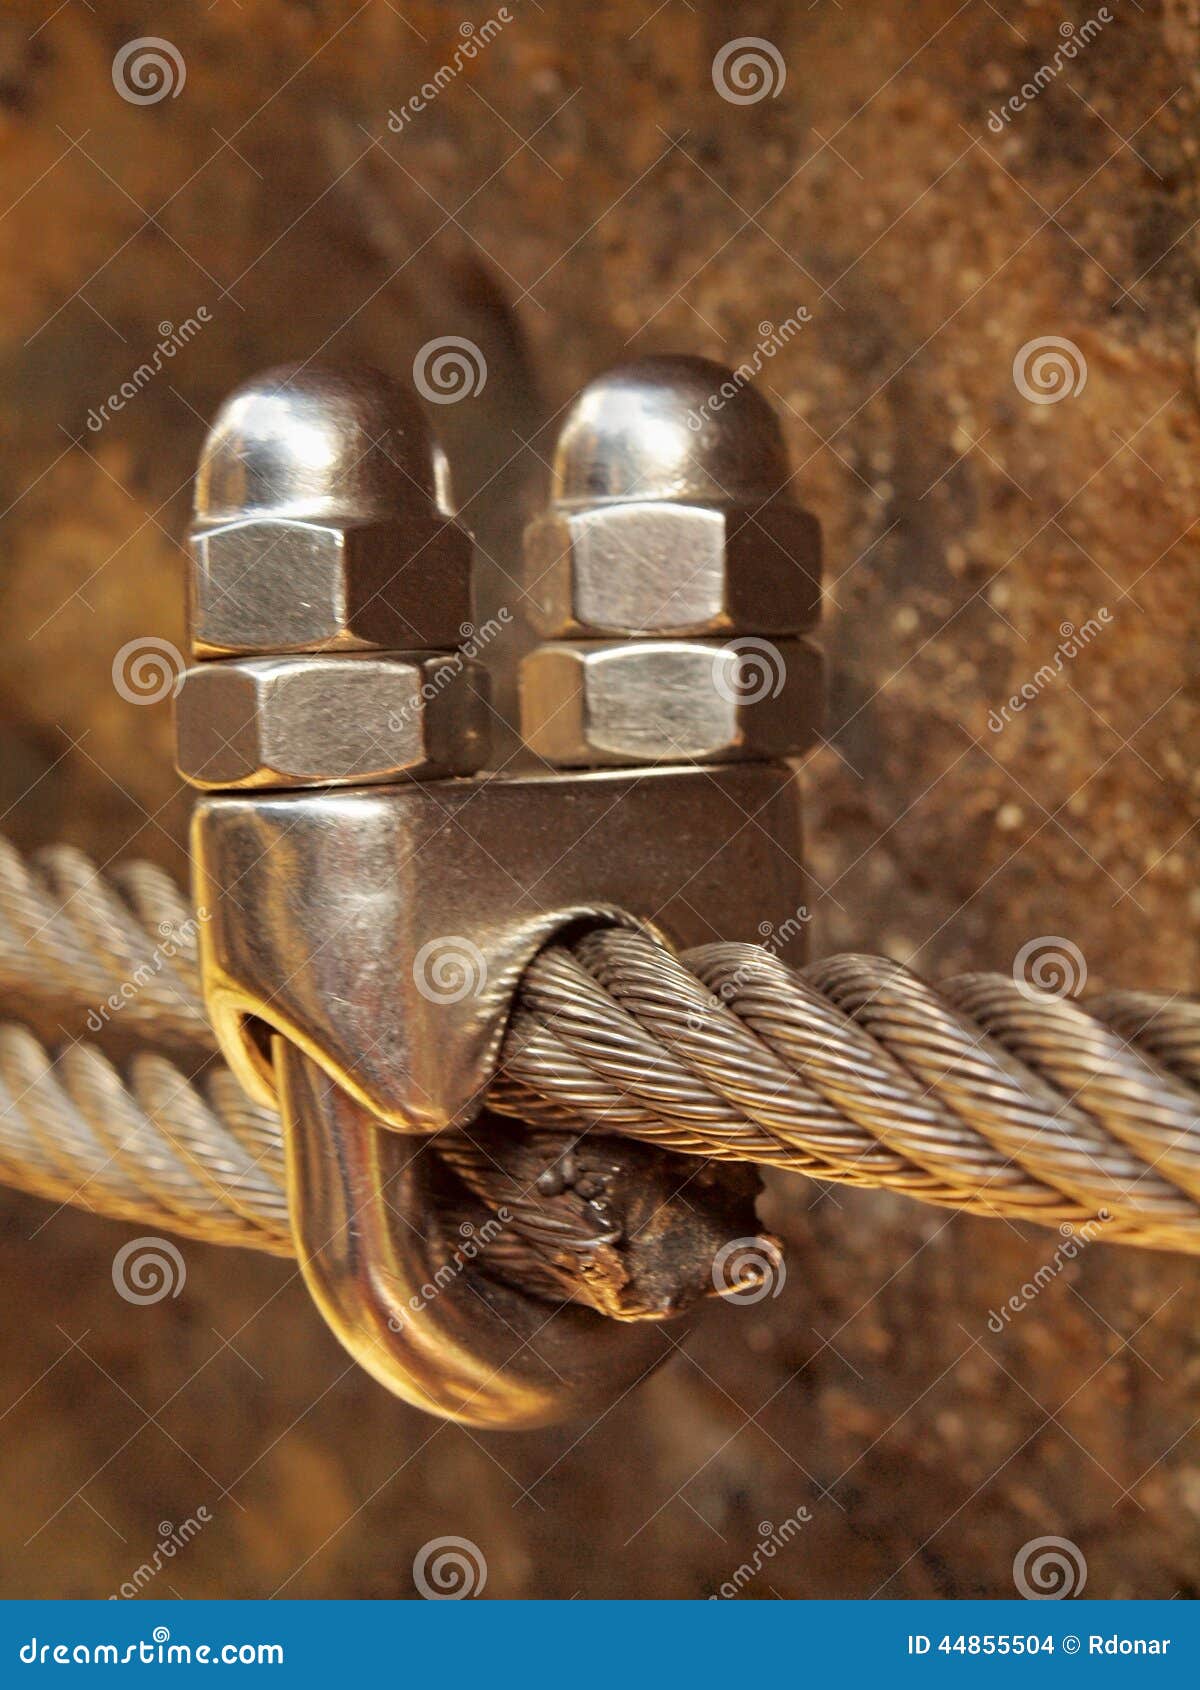 Detail of Clamp at End of Irone Rope. Climbers Iron Twisted Rope